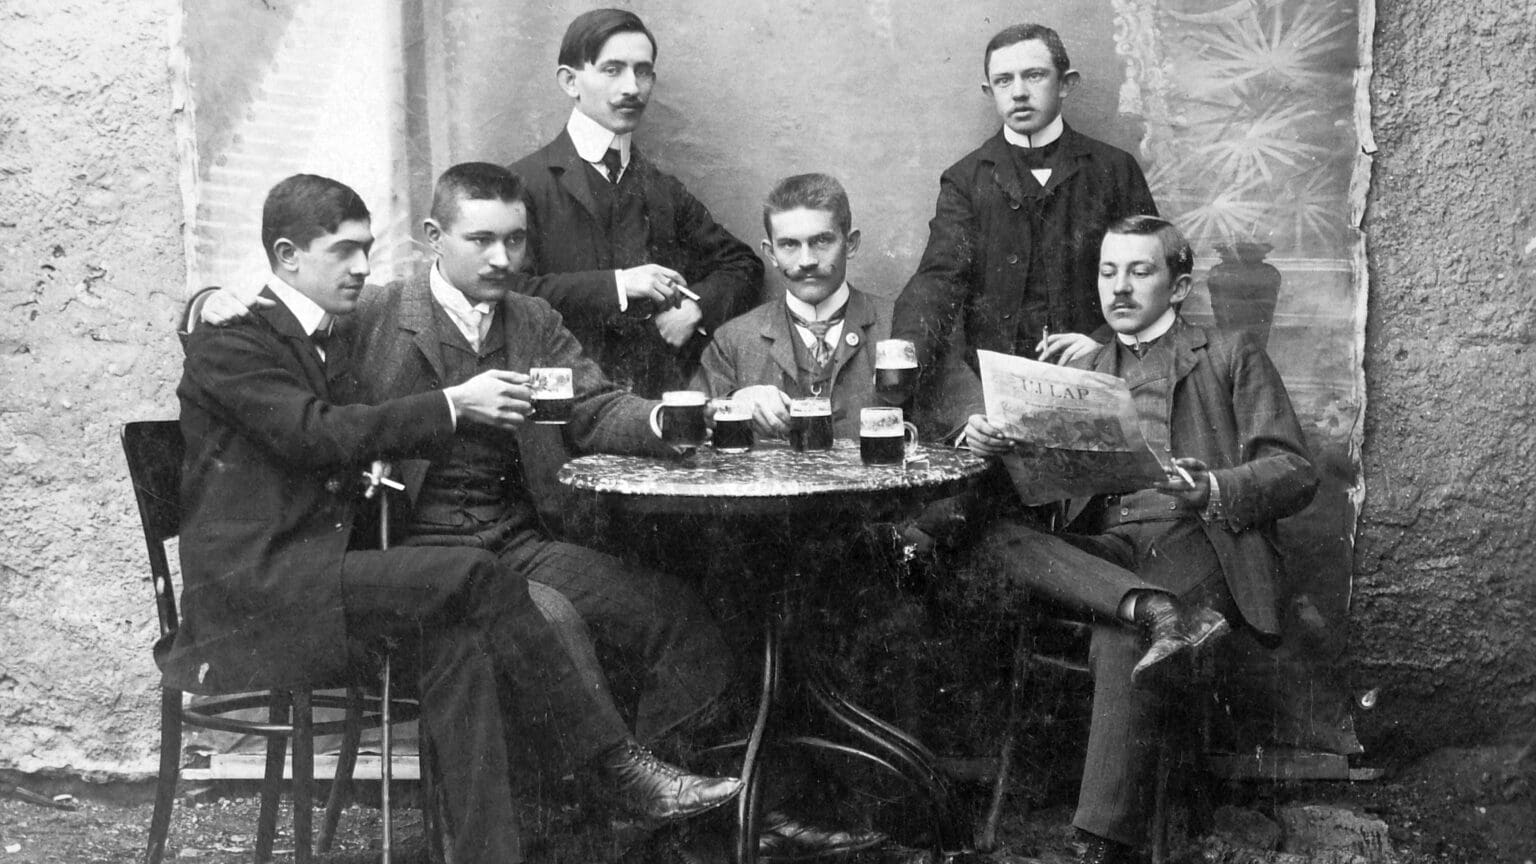 A Short History of Hungarian Beer Brewing